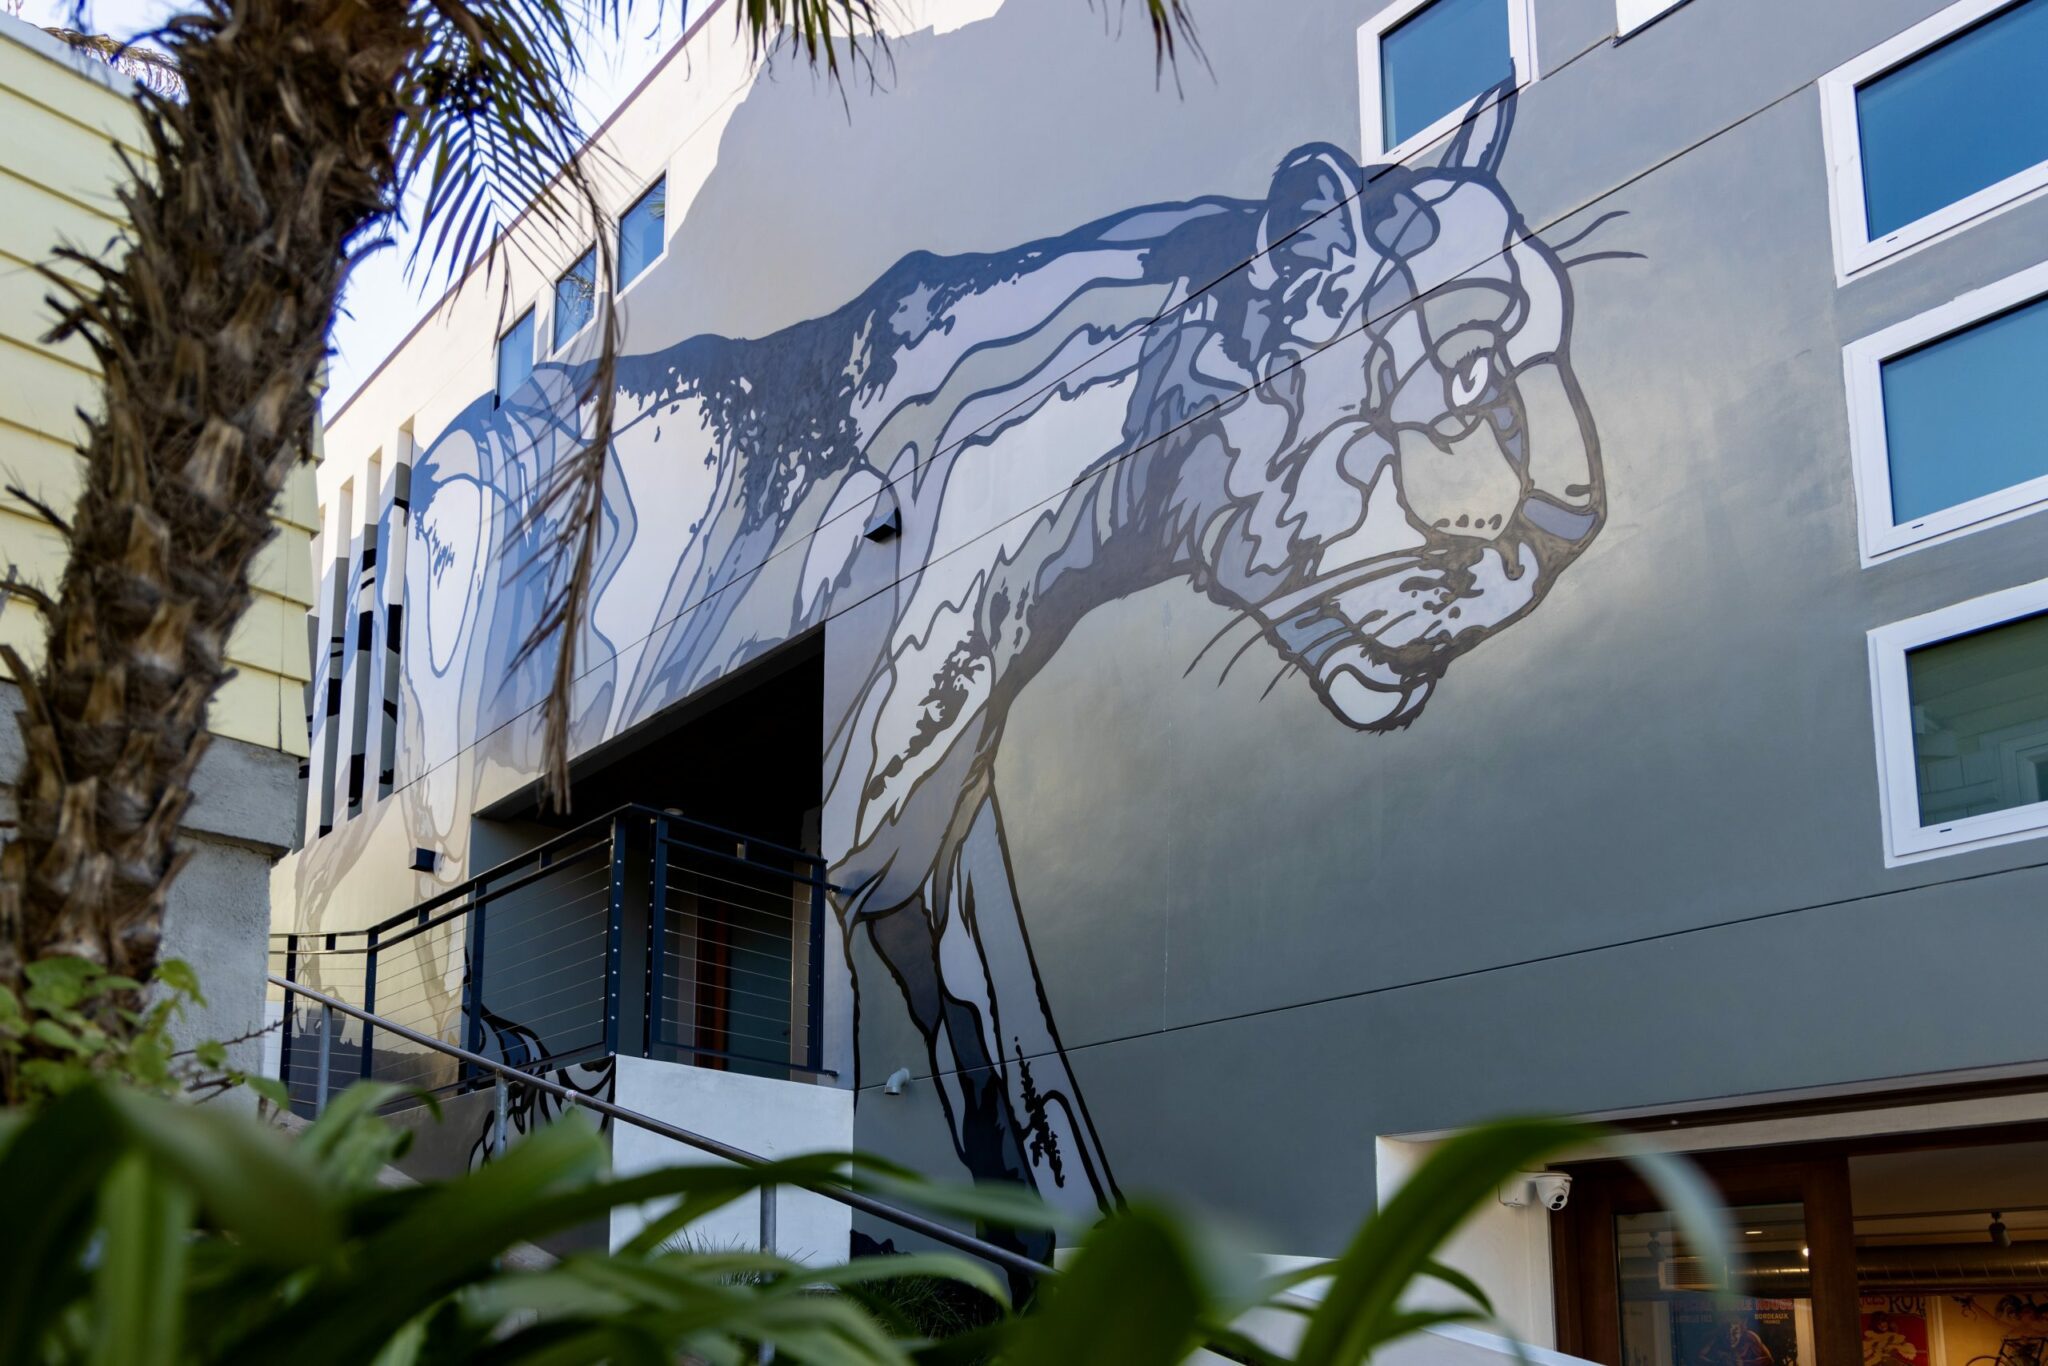 new mural on exterior of authentic vintage posters shop in La Jolla of famed lion P-22.